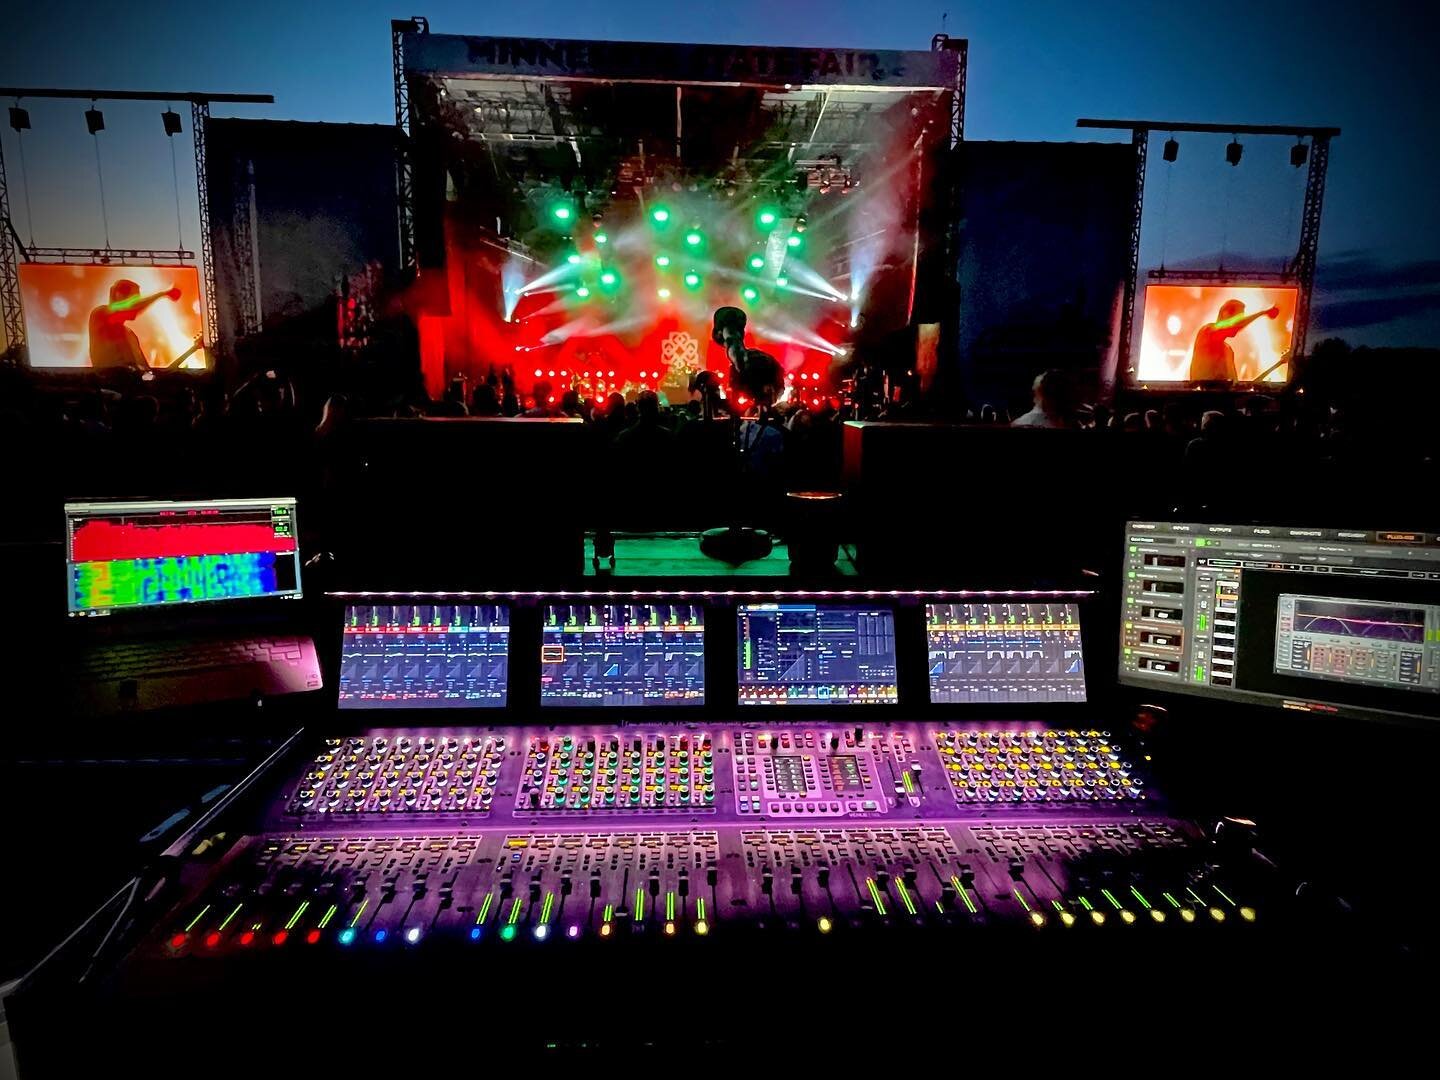 A beautiful sunset for the backdrop for tonight&rsquo;s @breakingbenjamin show at the @mnstatefair 

Had a nice visit with an old friend and then an awesome show with my new friends.

Life is good. 

.
.
.
.
#audioengineer #bands #BigRockShow #Breaki